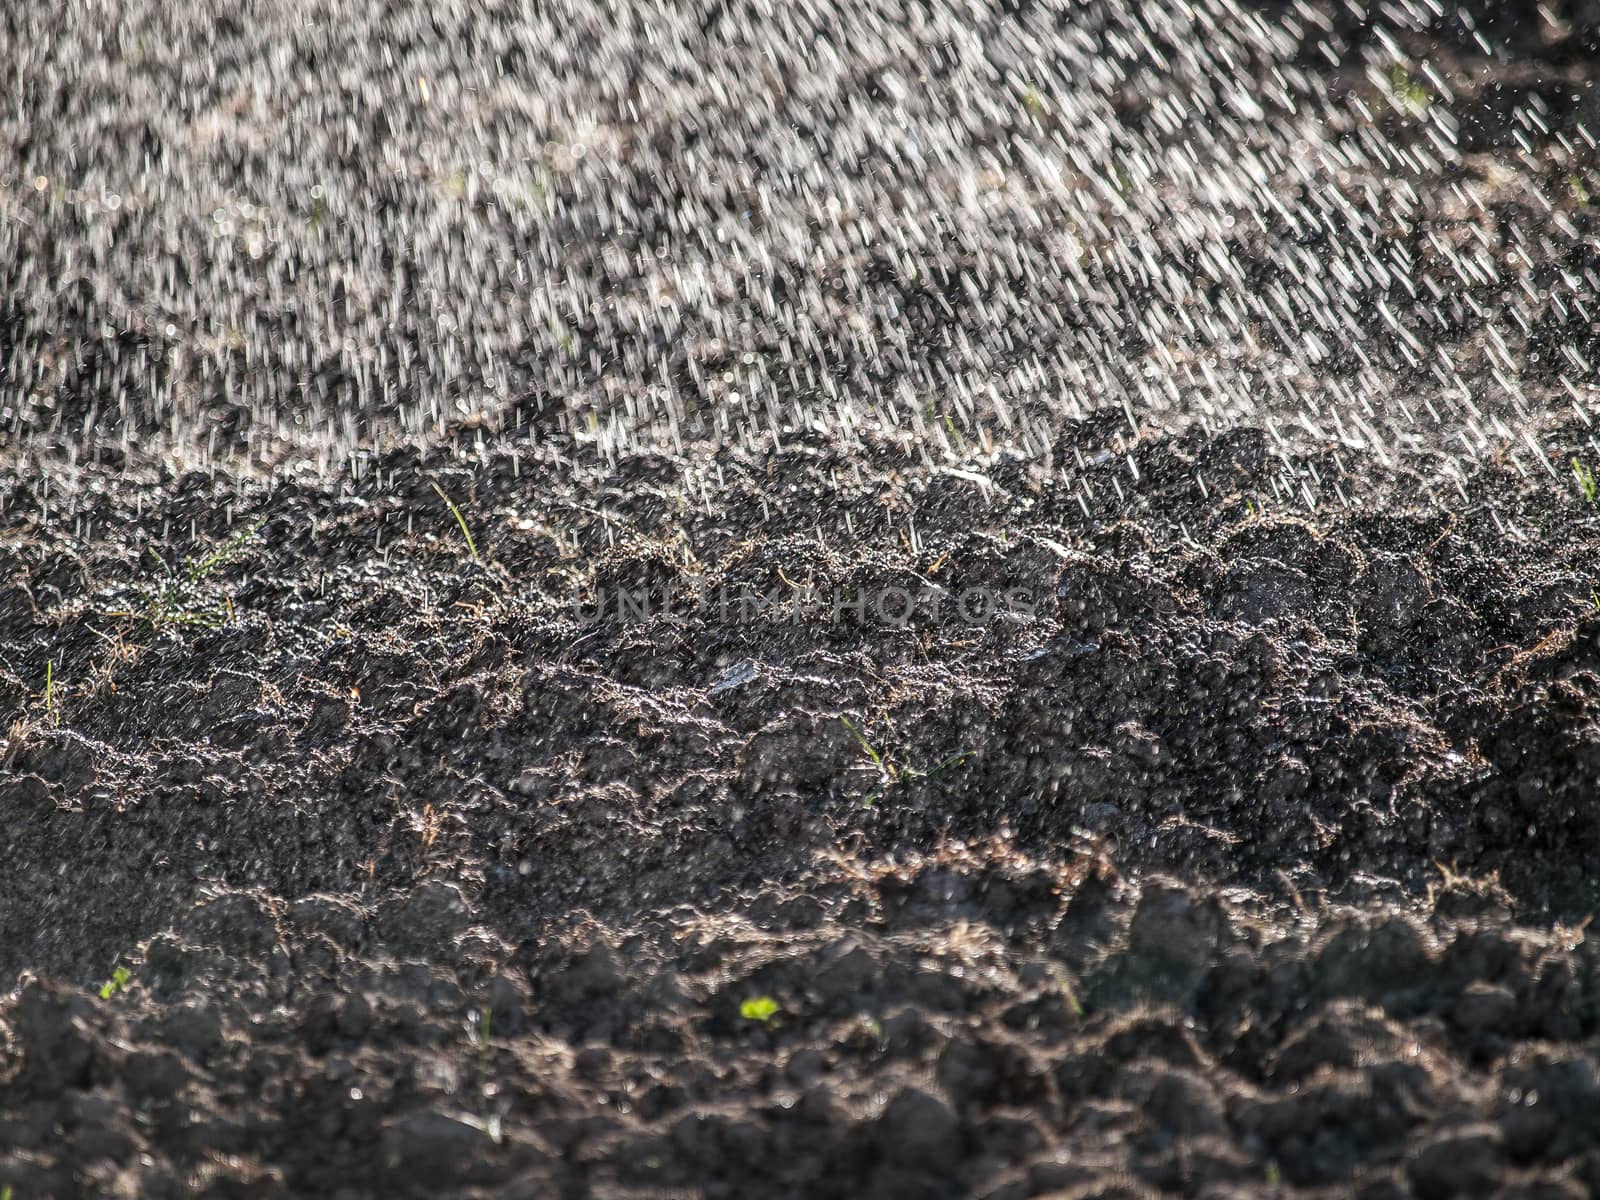 Spraying water over cultivated land by Alex_L